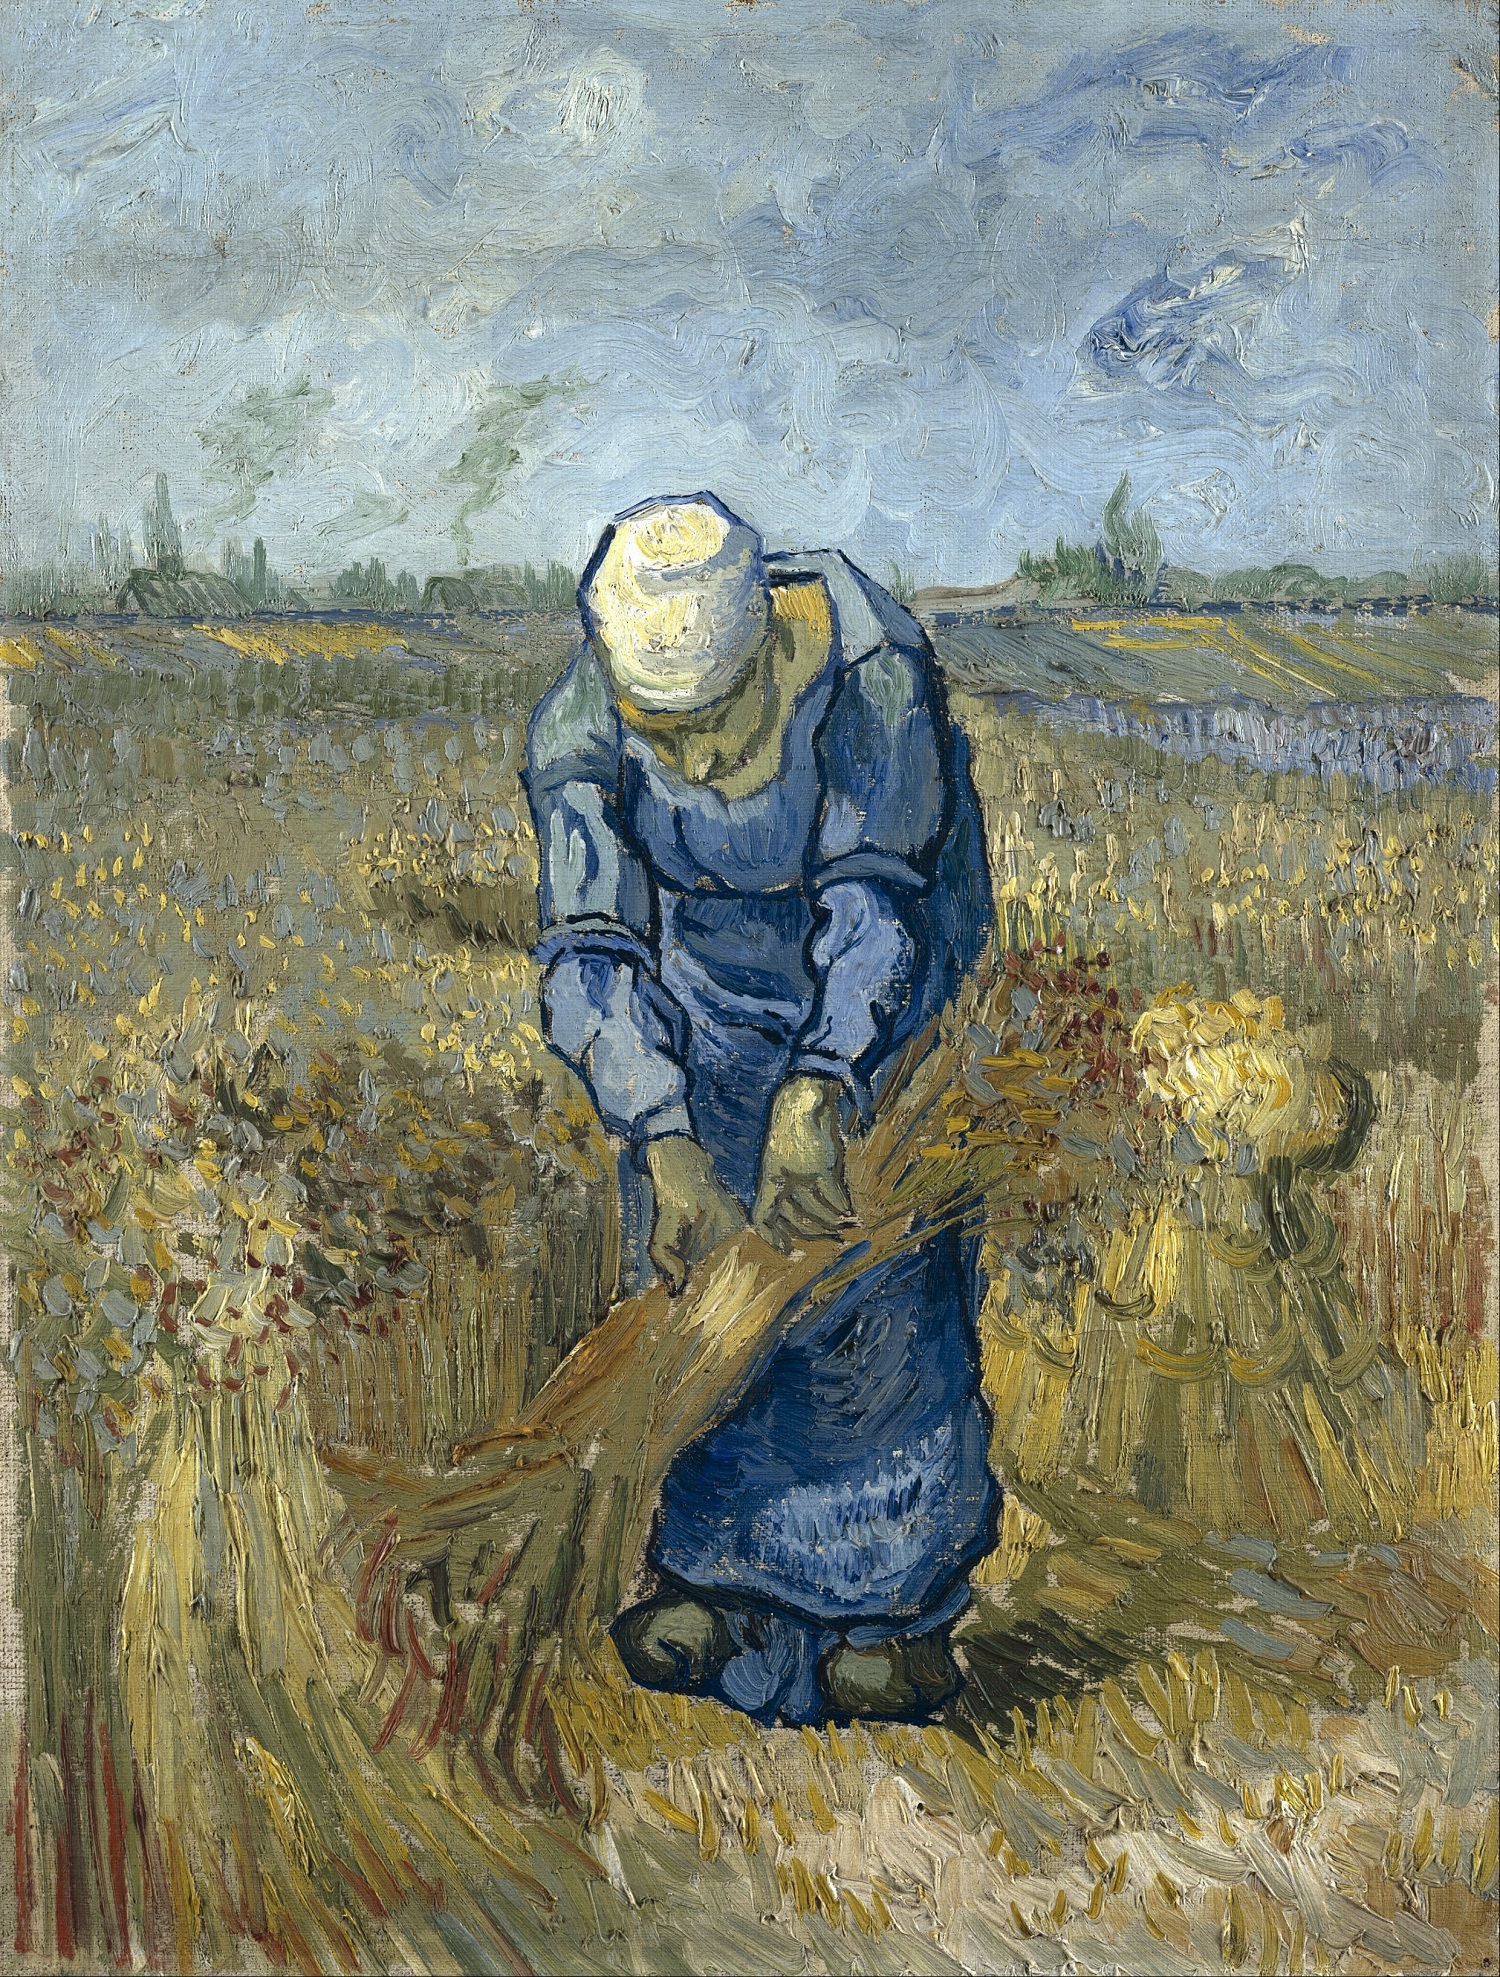 Peasant Woman Binding Sheaves (after Millet) by Vincent Van Gogh (1889) - Google Art Project 